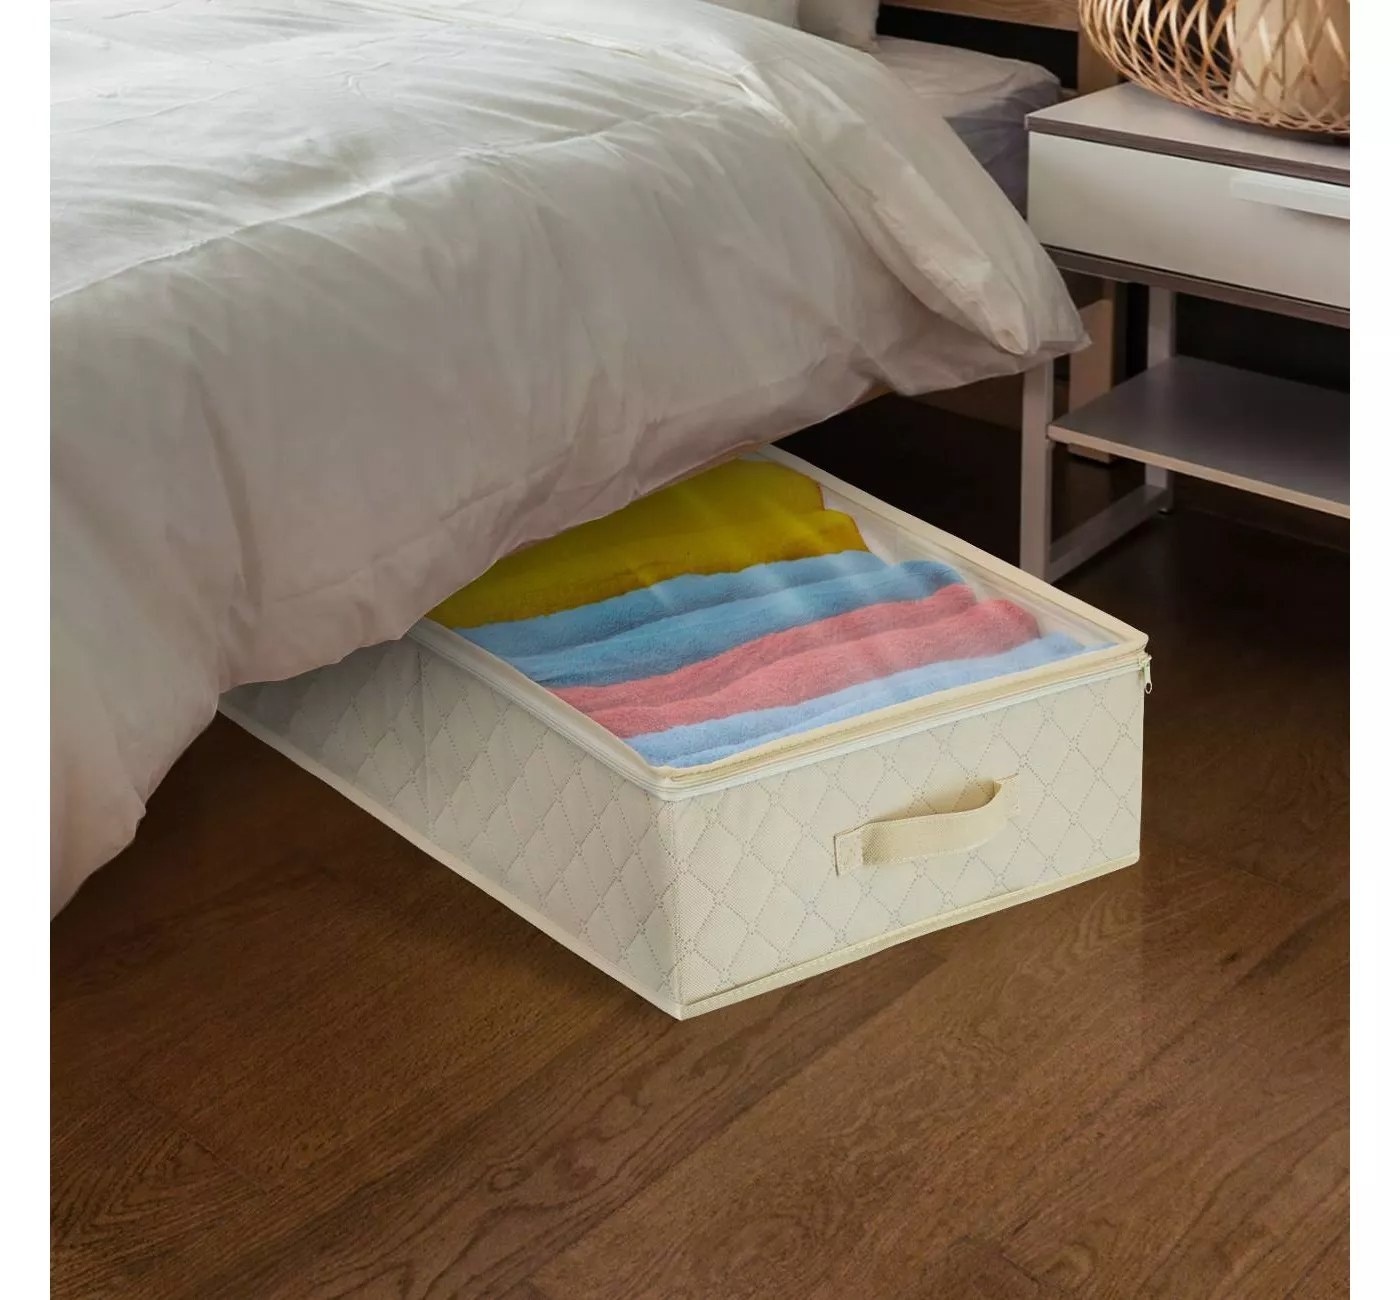 A storage bag under the bed